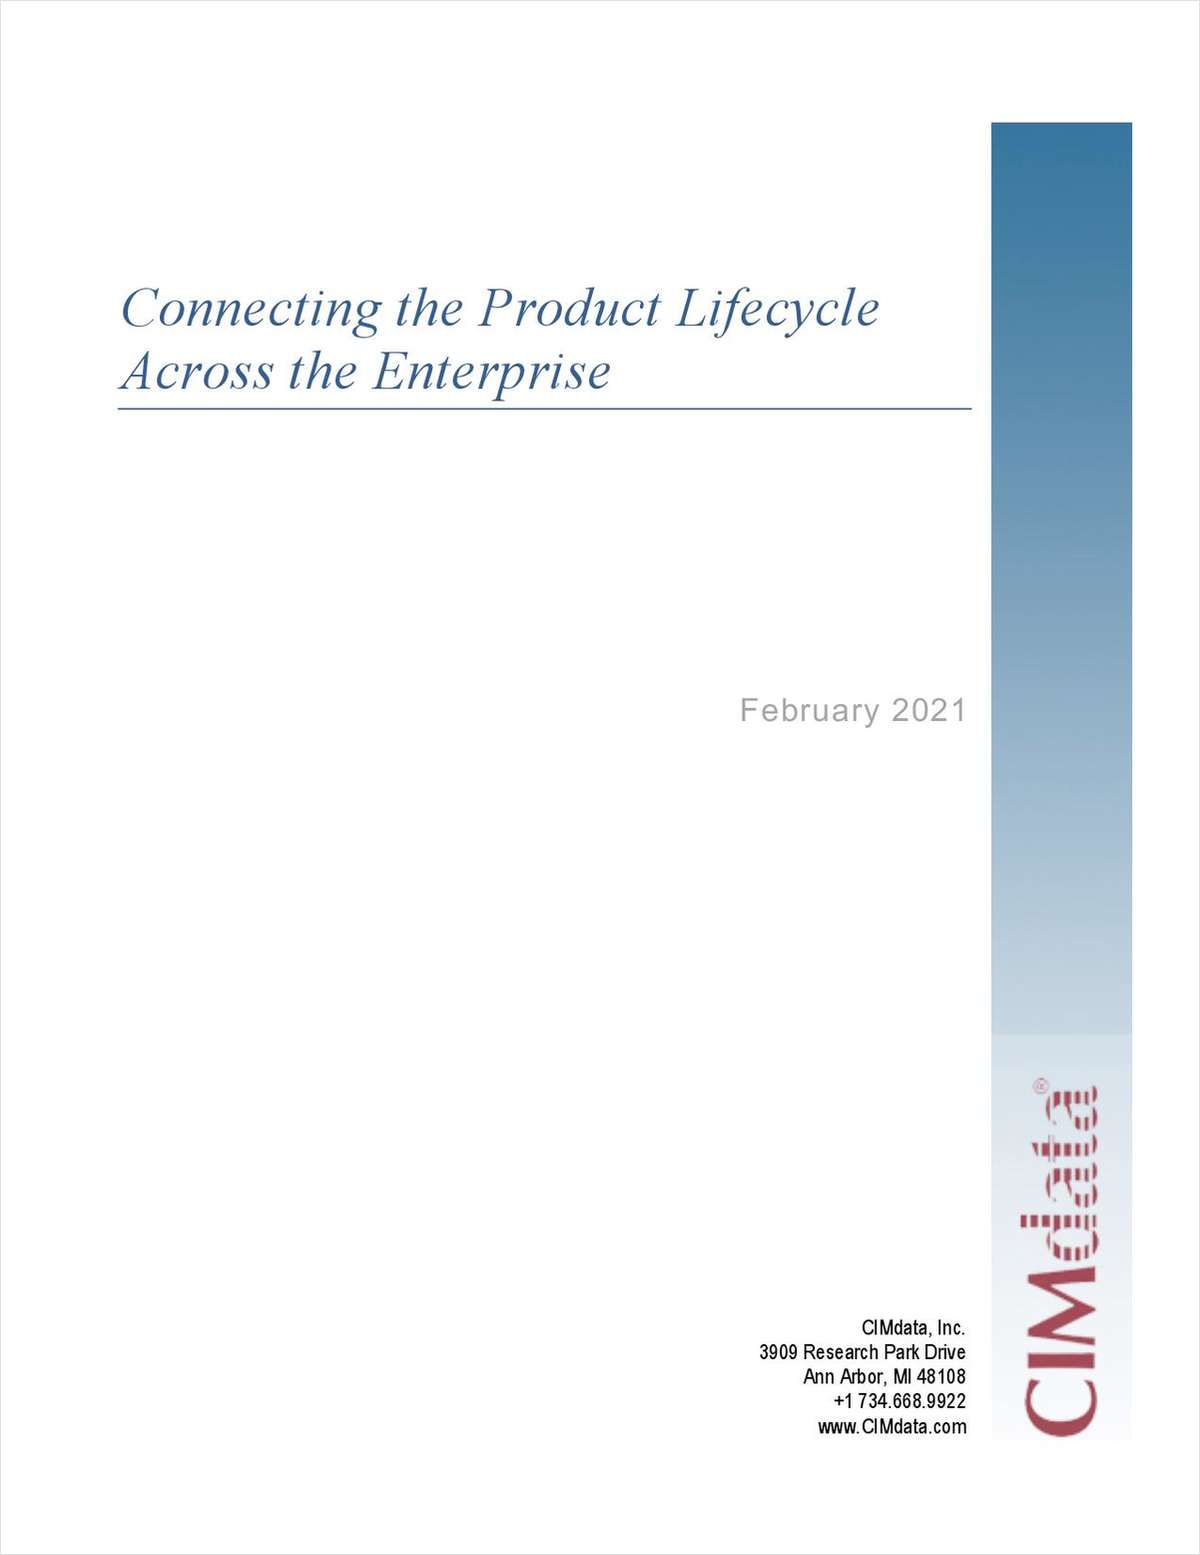 Connecting the Product Lifecycle Across the Enterprise